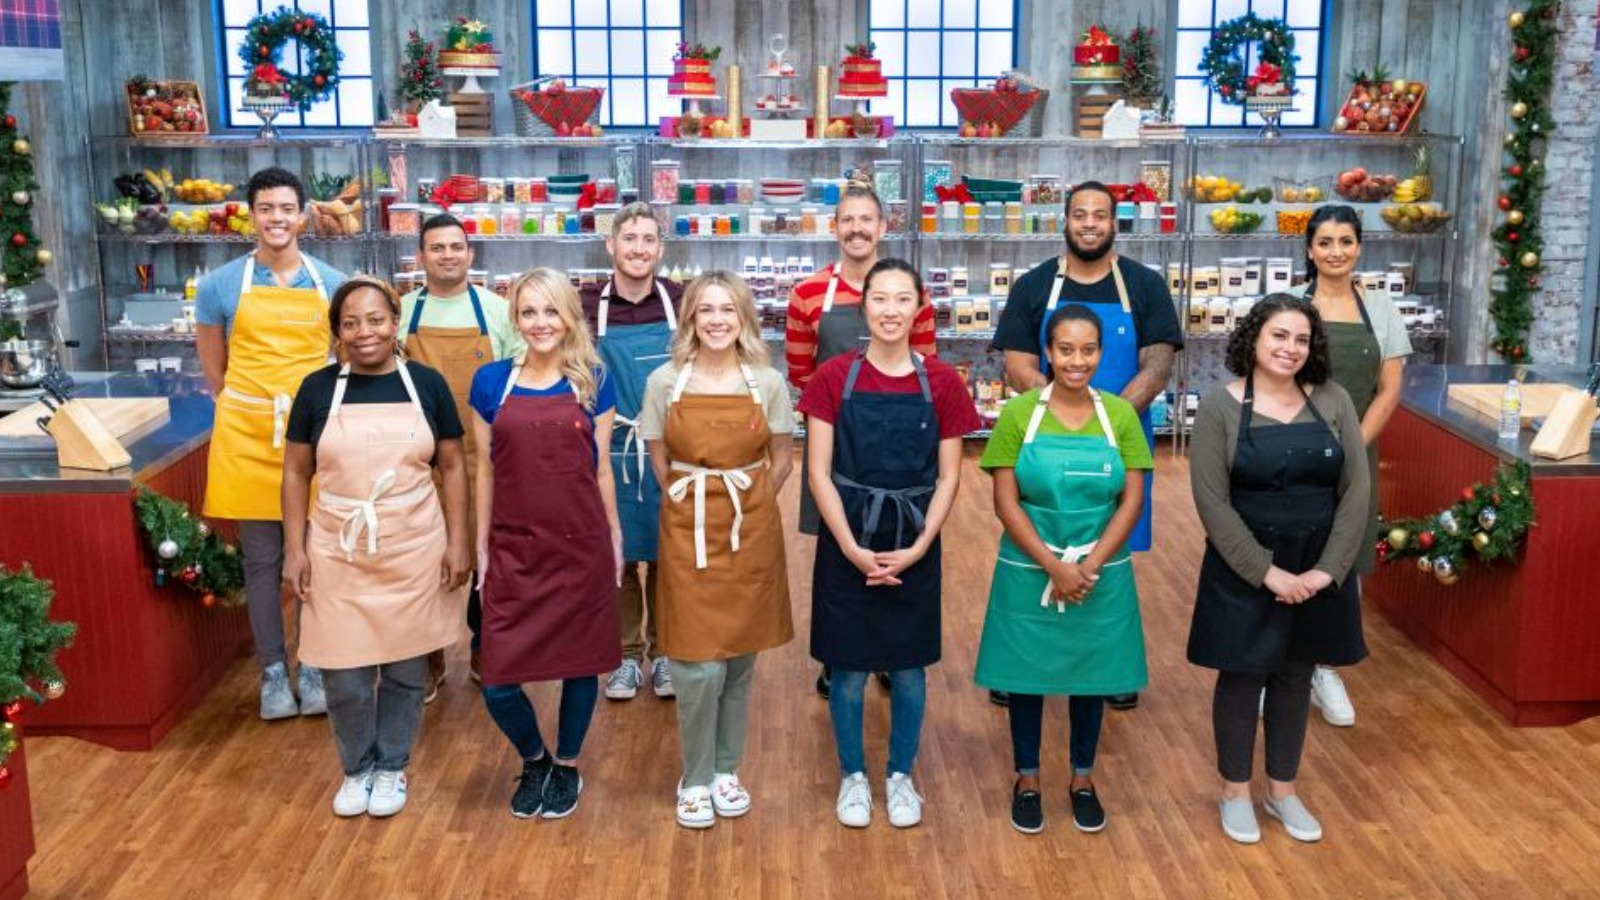 Holiday Baking Championship Season 9 Episodes, Release Date And More